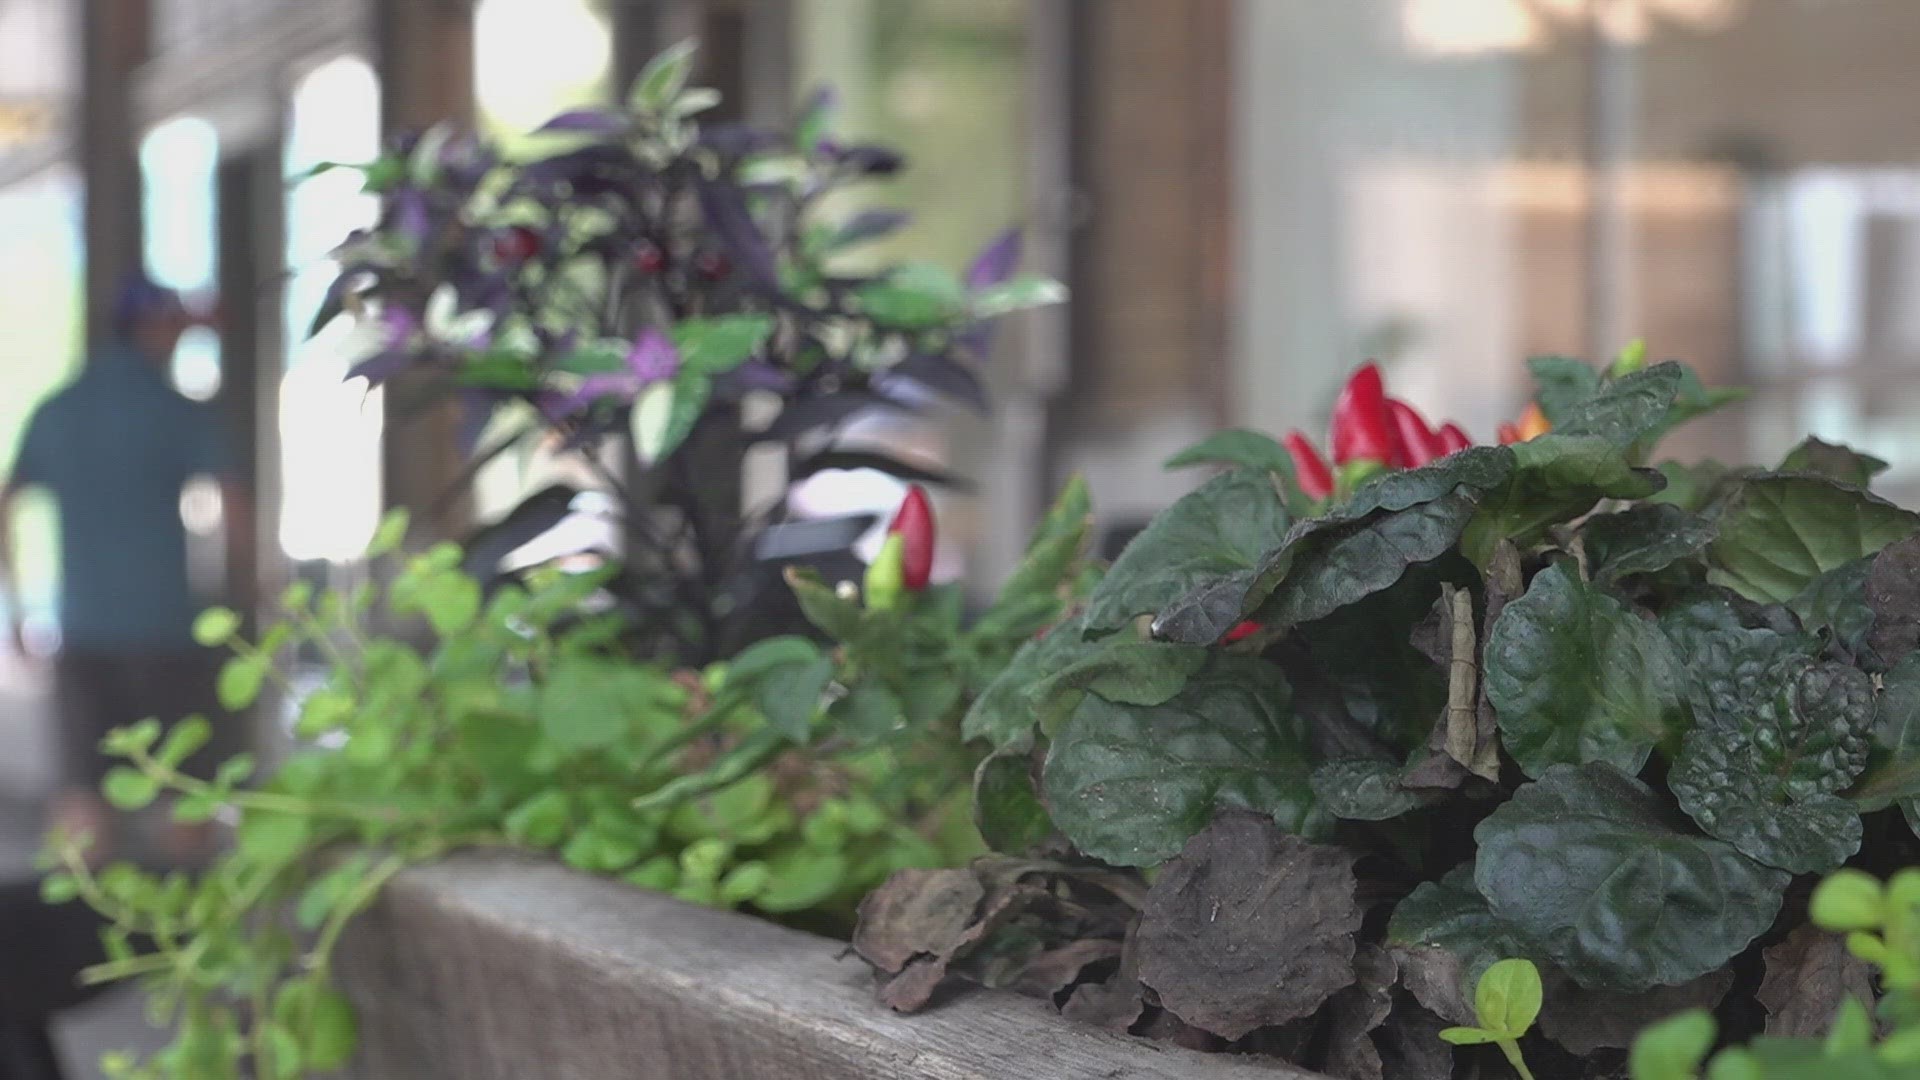 Downtown business owners told 10News that flower vandalism has been happening for years and they don't plan on stopping putting out flowers.